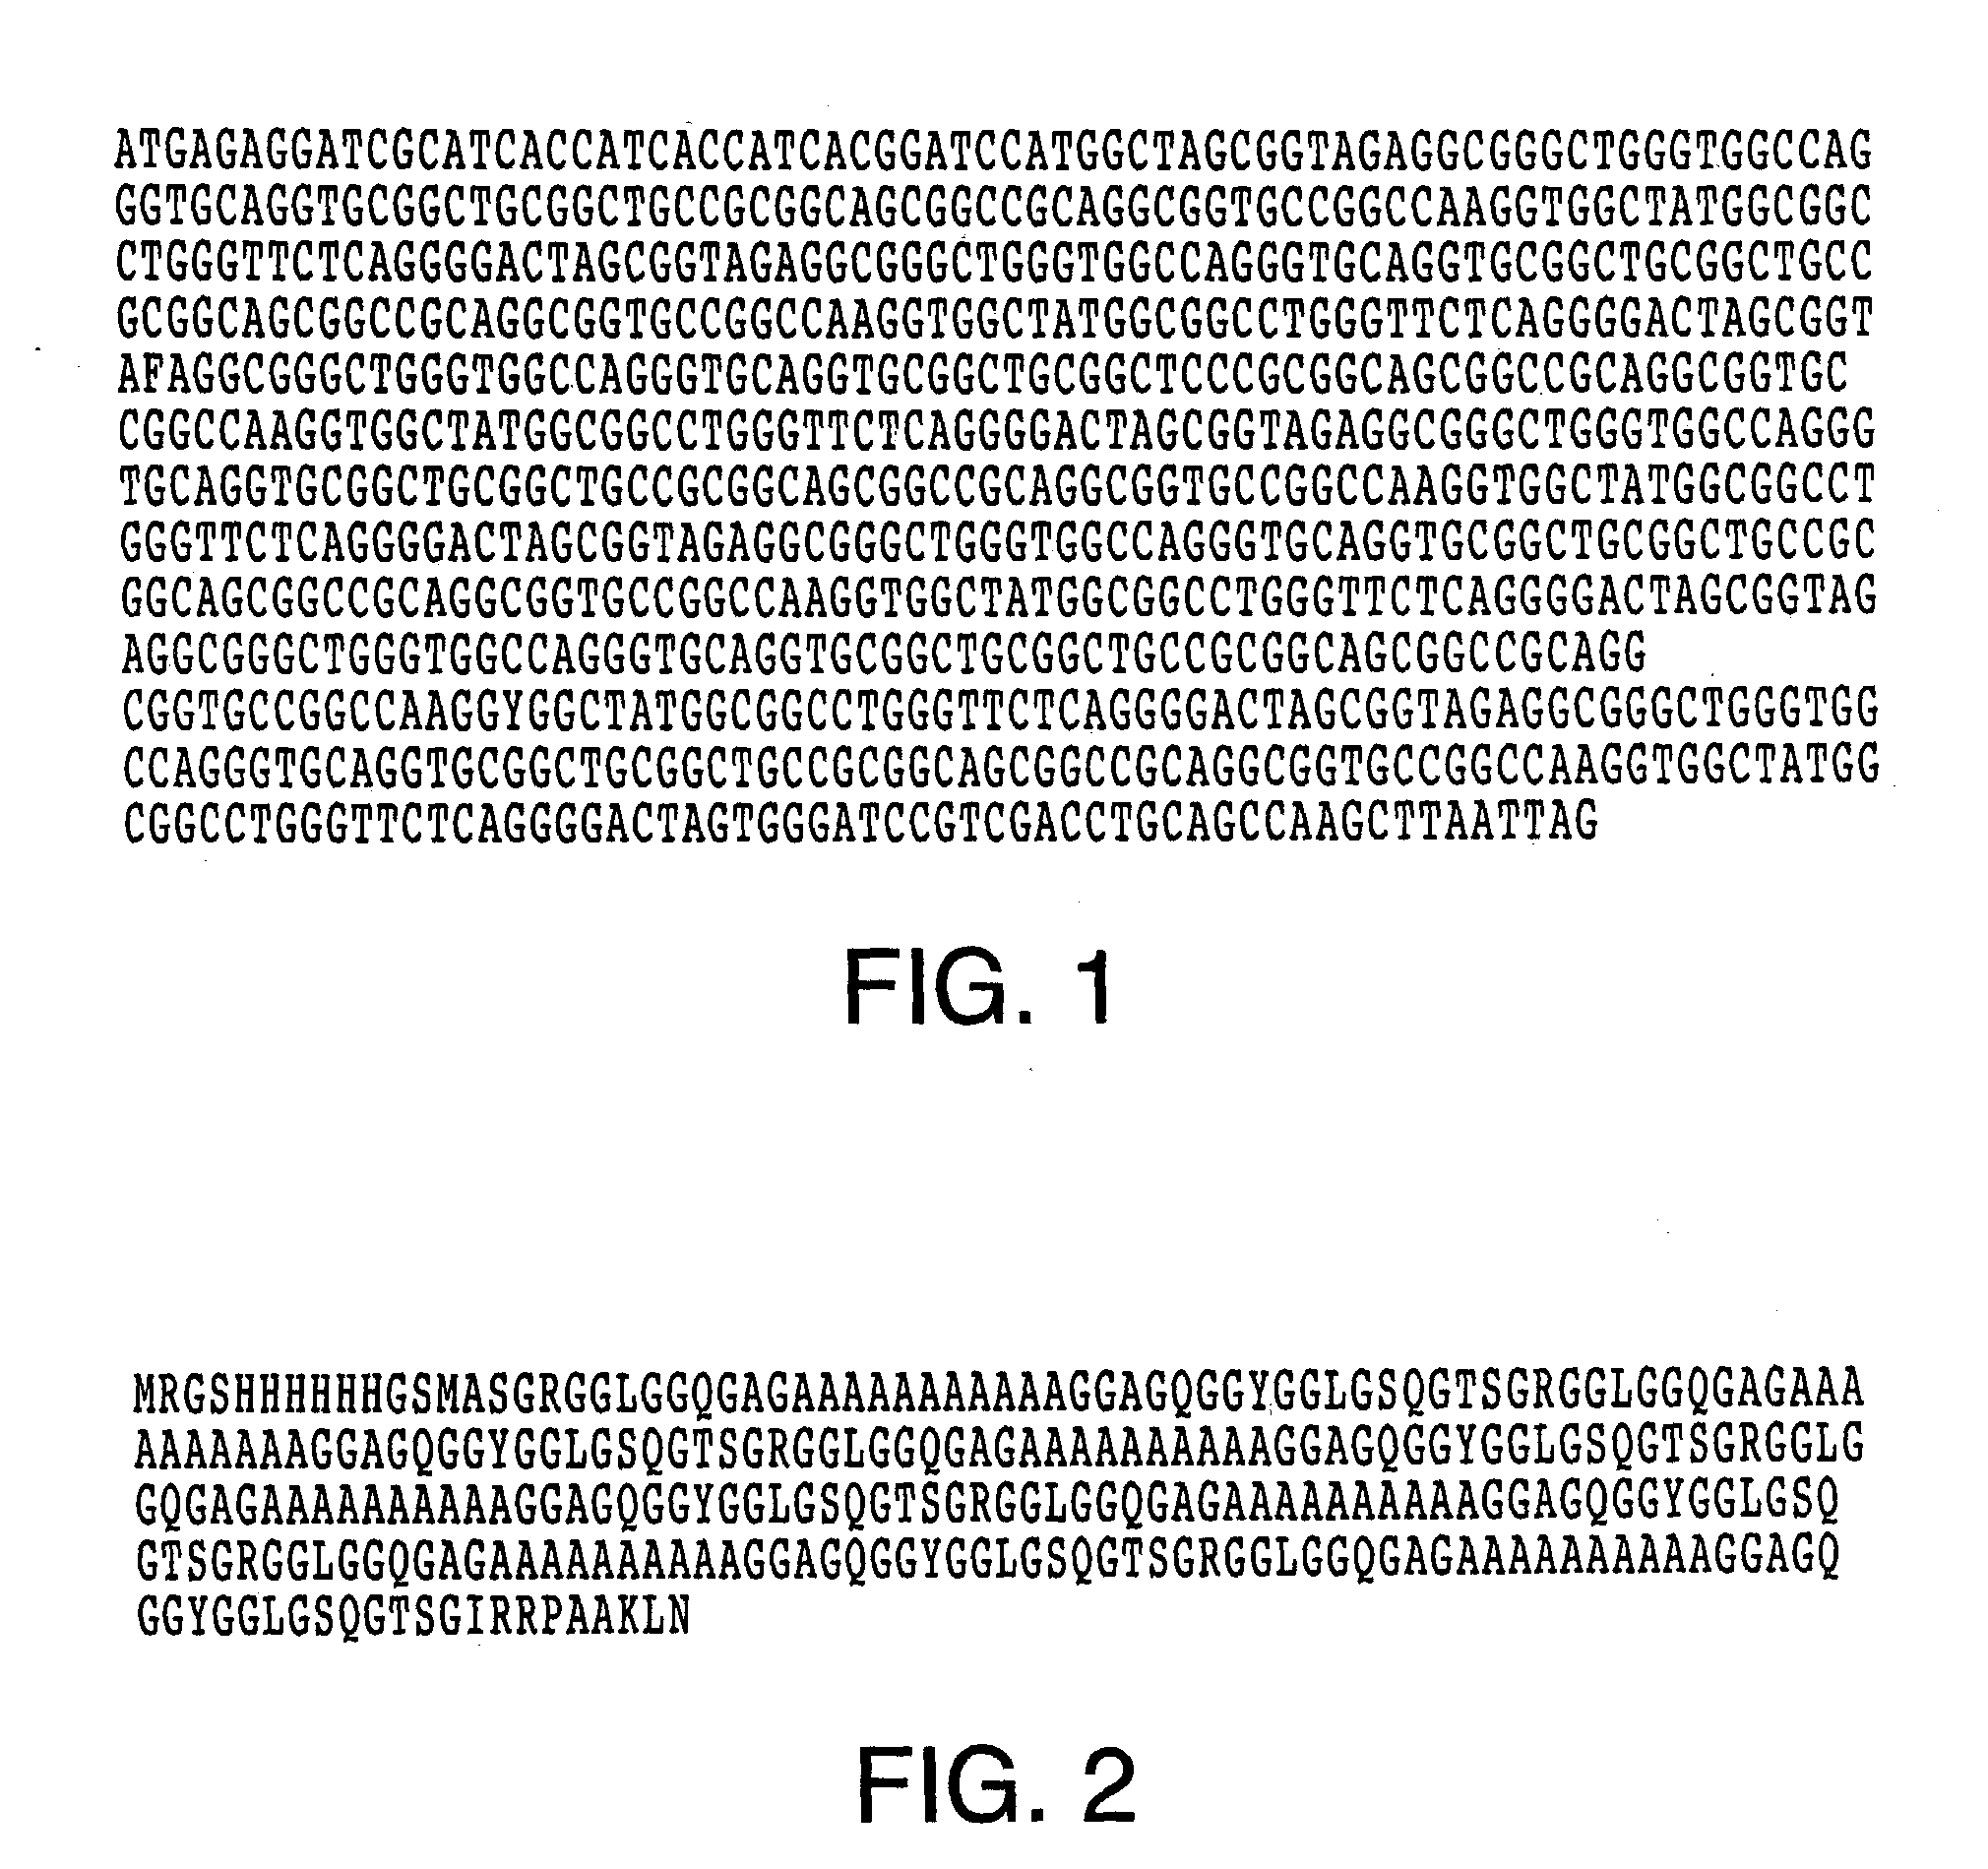 Methods for the purification and aqueous fiber spinning of spider silks and other structural proteins